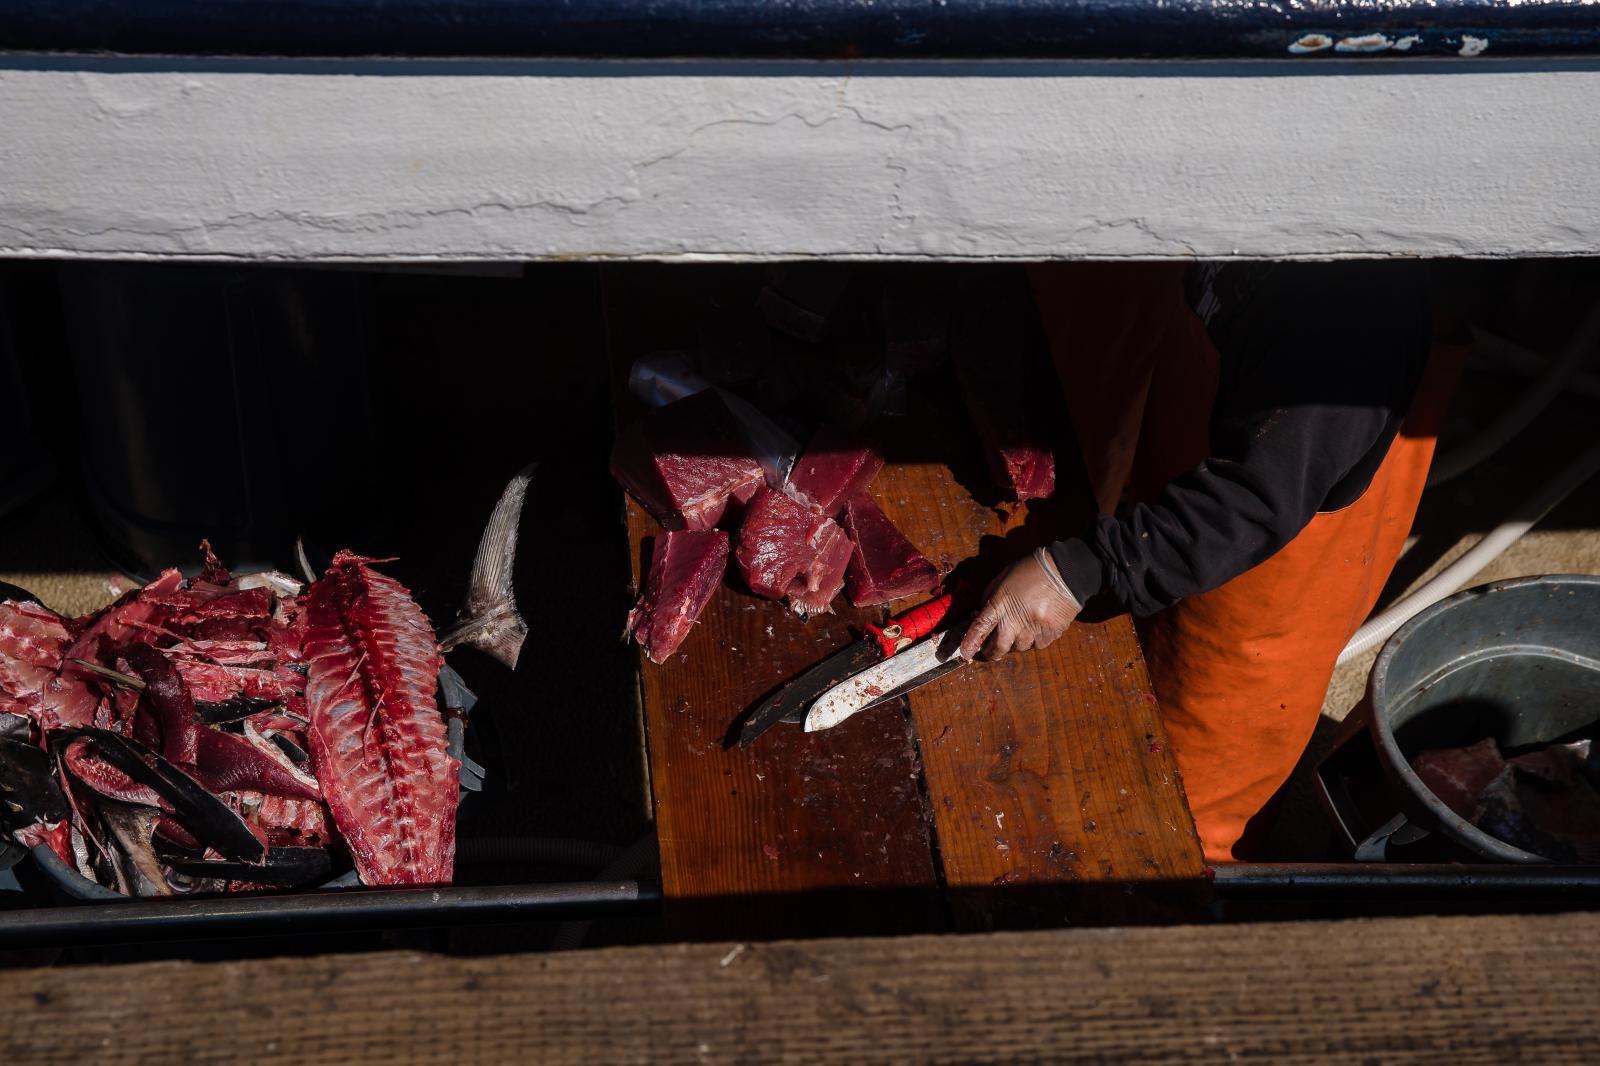 A fisherman cuts fish on the Pacific Horizon fishing Boat, (owned by the Haworth family) at the Tuna Harbor Dockside Market on April 11, 2020 in San Diego, California. Fisherman have had to regroup to stay afloat due to Covid-19. Since local restaurants have been shut down and not every establishment is doing take-out or deliveries, they have to had to lower their cost for the locals who have been purchasing their fish.